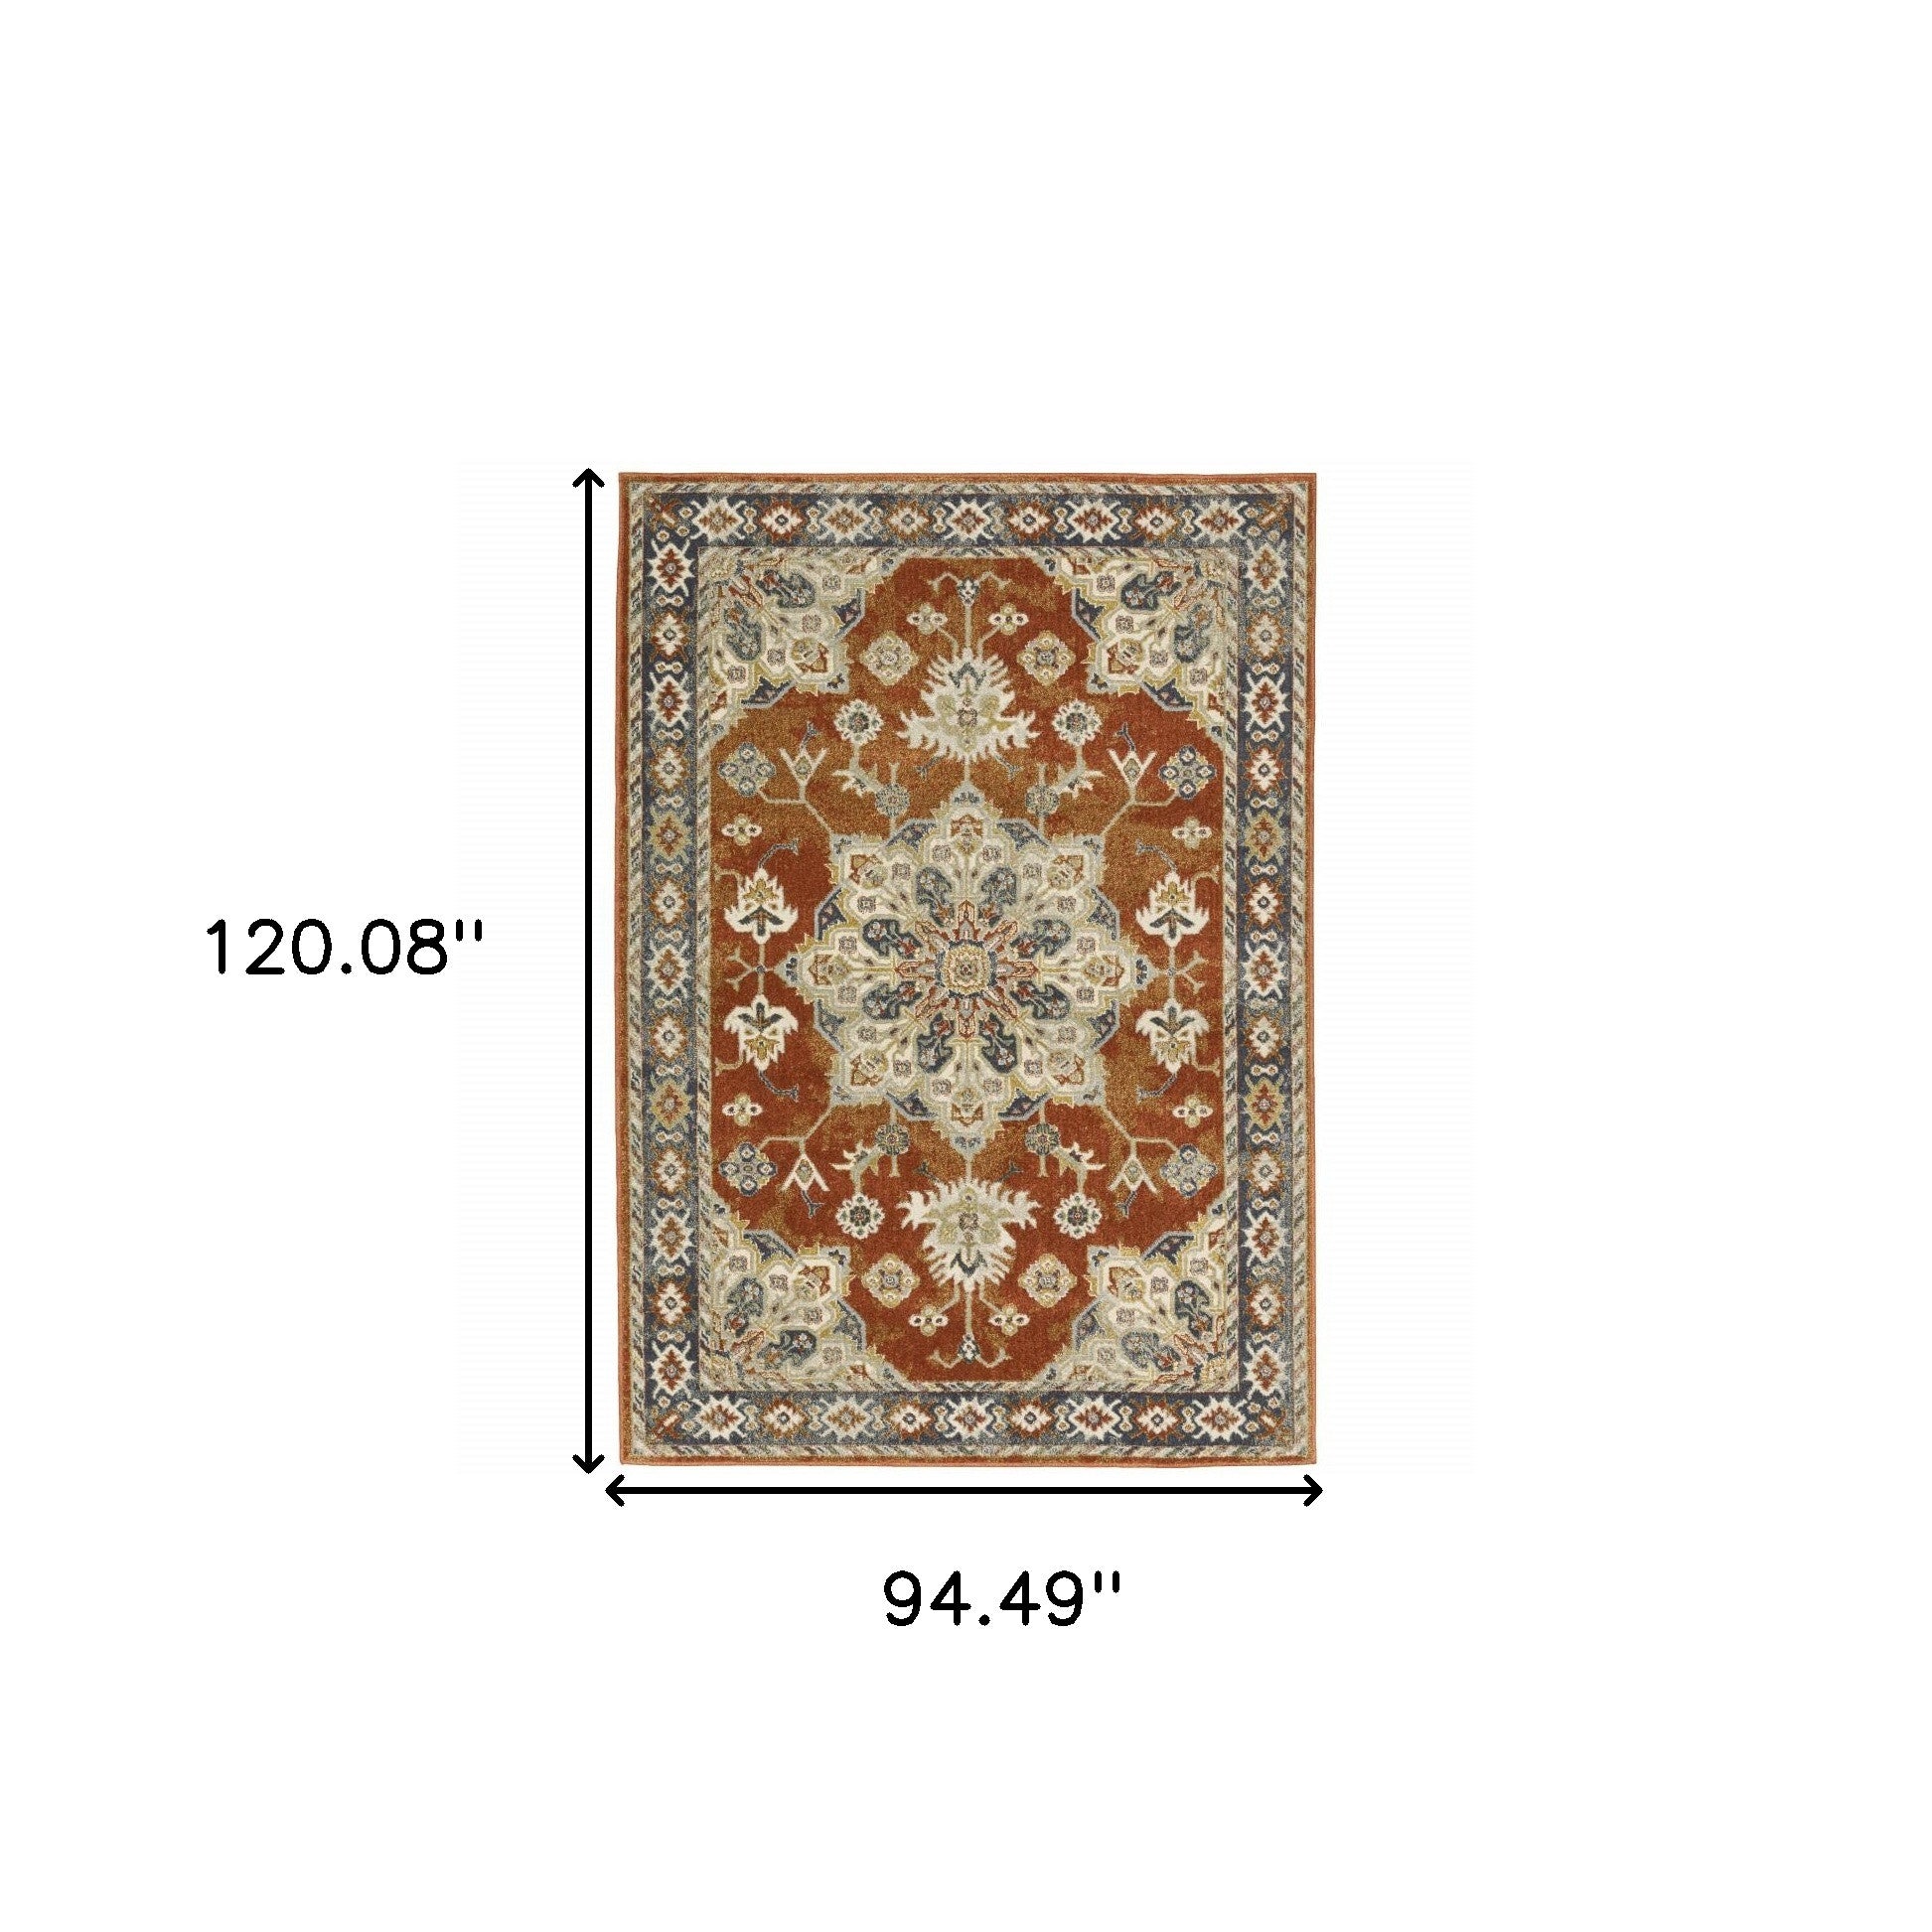 8' X 10' Rust Beige Teal Blue And Gold Oriental Power Loom Stain Resistant Area Rug